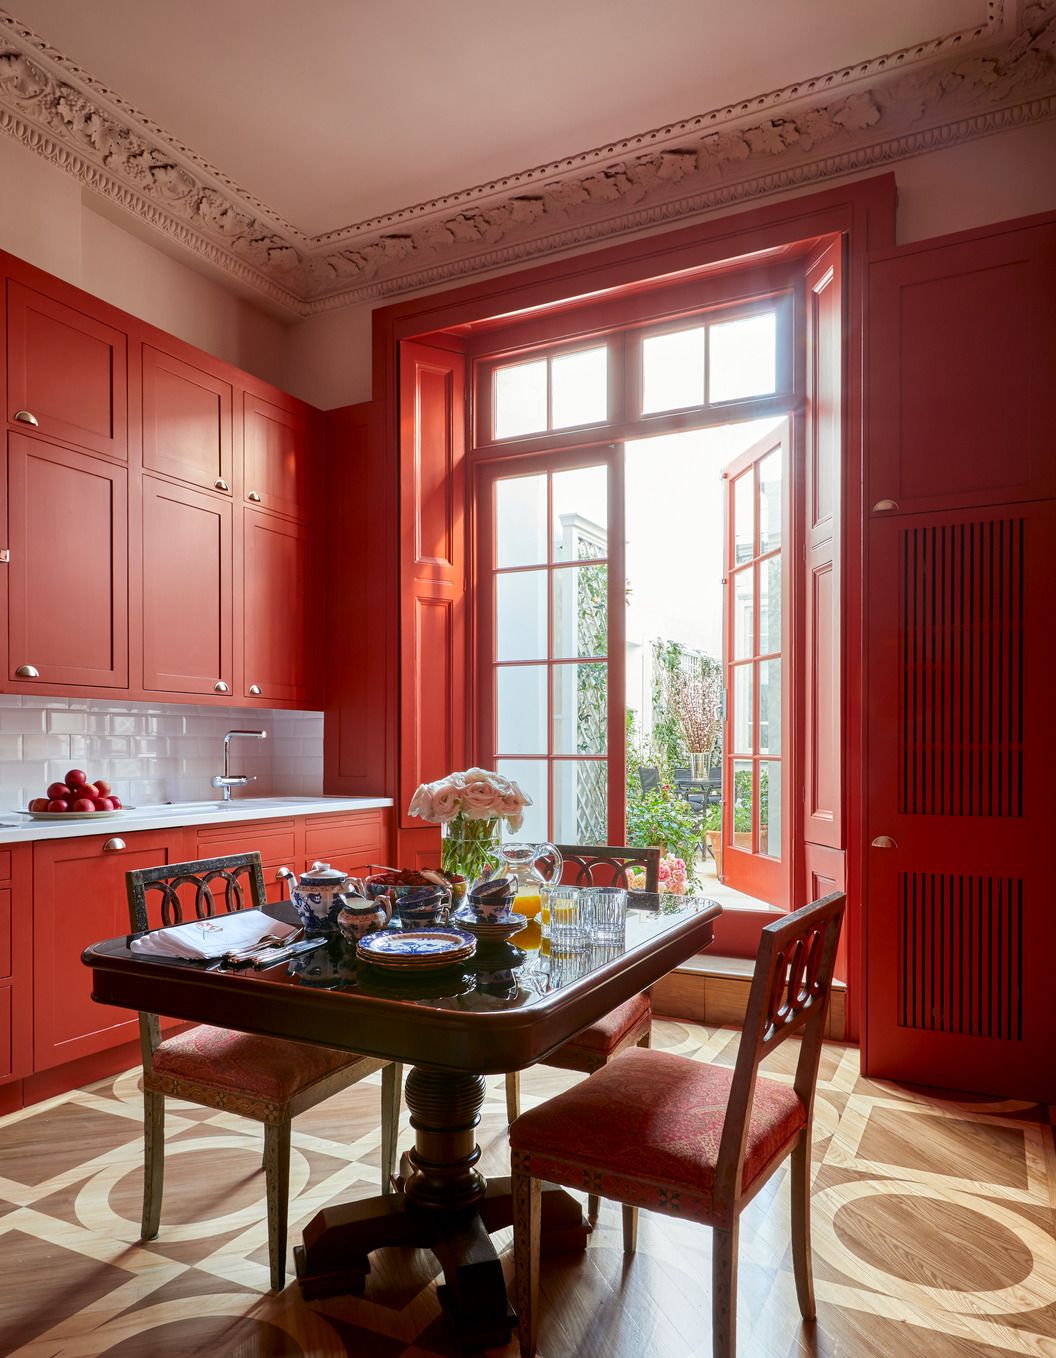 Red Kitchen Ideas - 5 Ways to Incorporate This Vibrant Hue